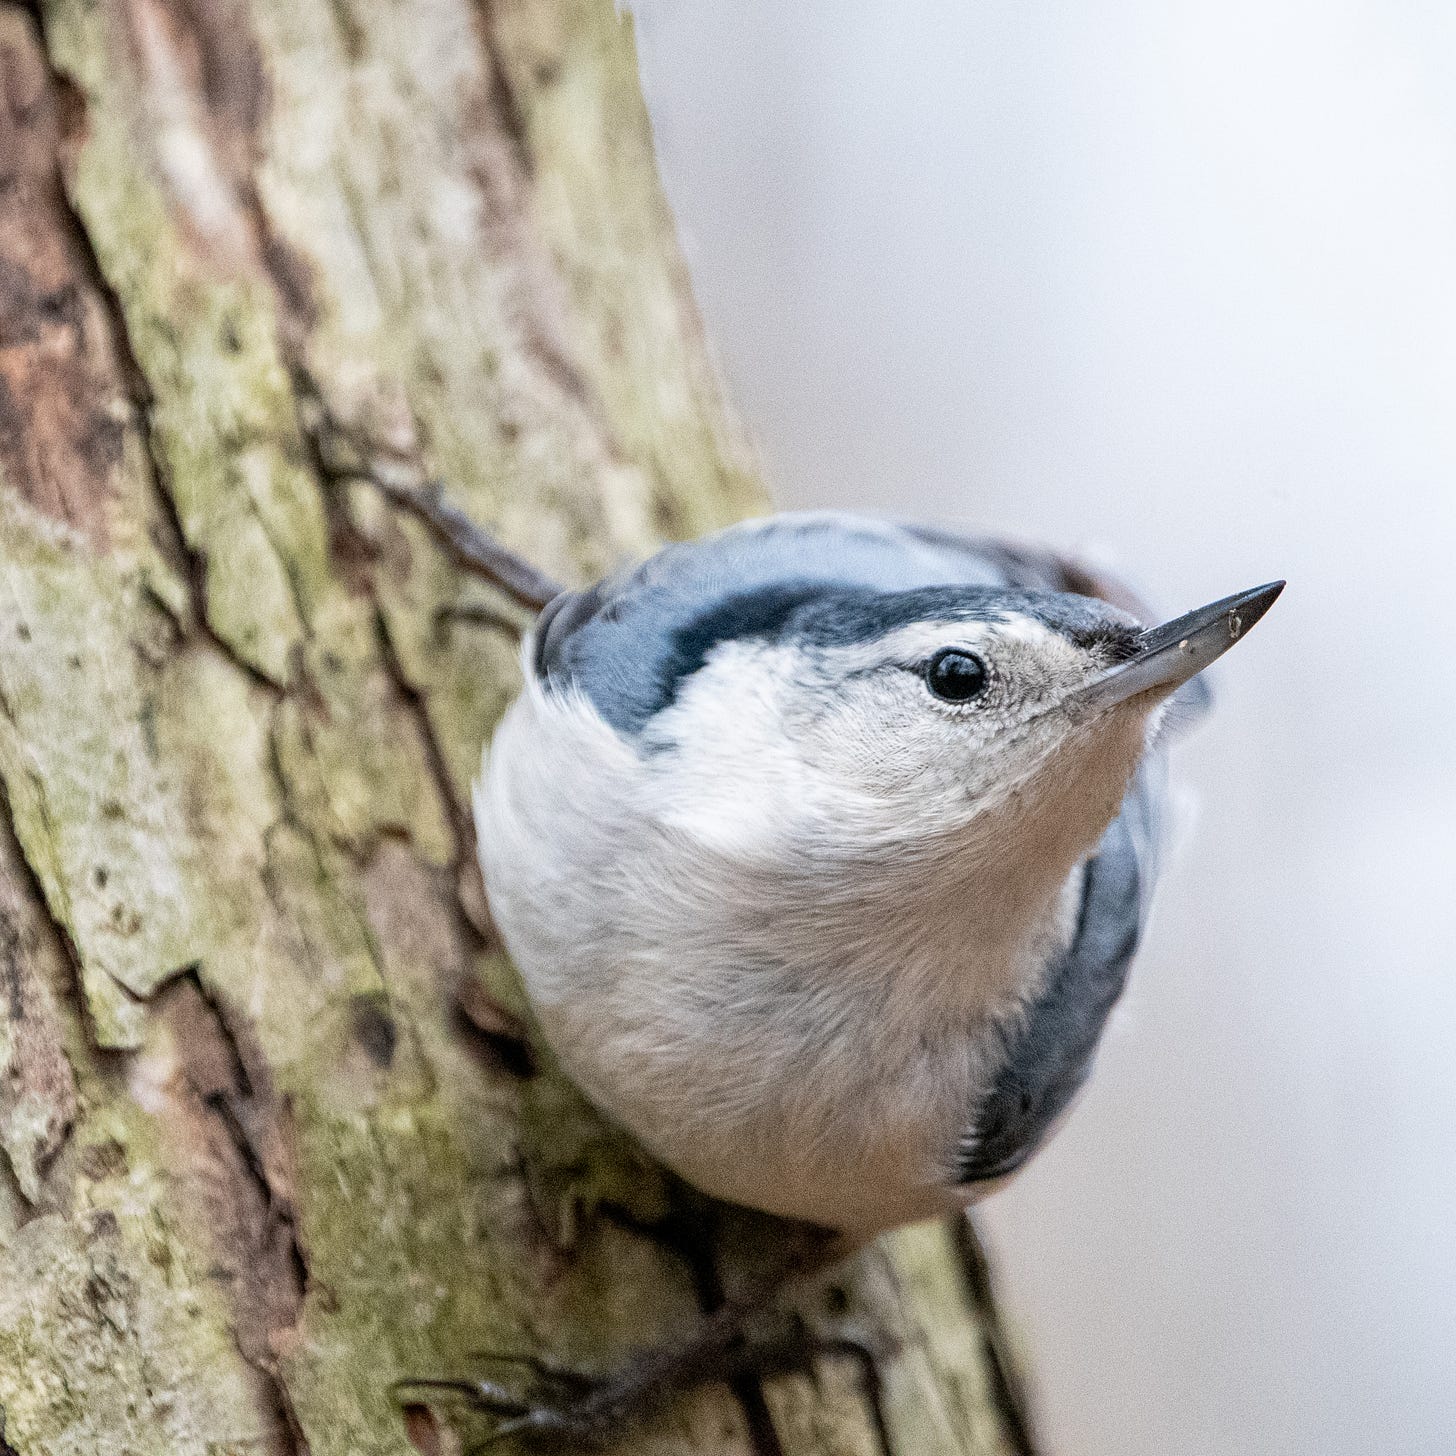 A close-up of a white-breasted nuthatch, its body aimed at the viewer, swiveling its head to the right